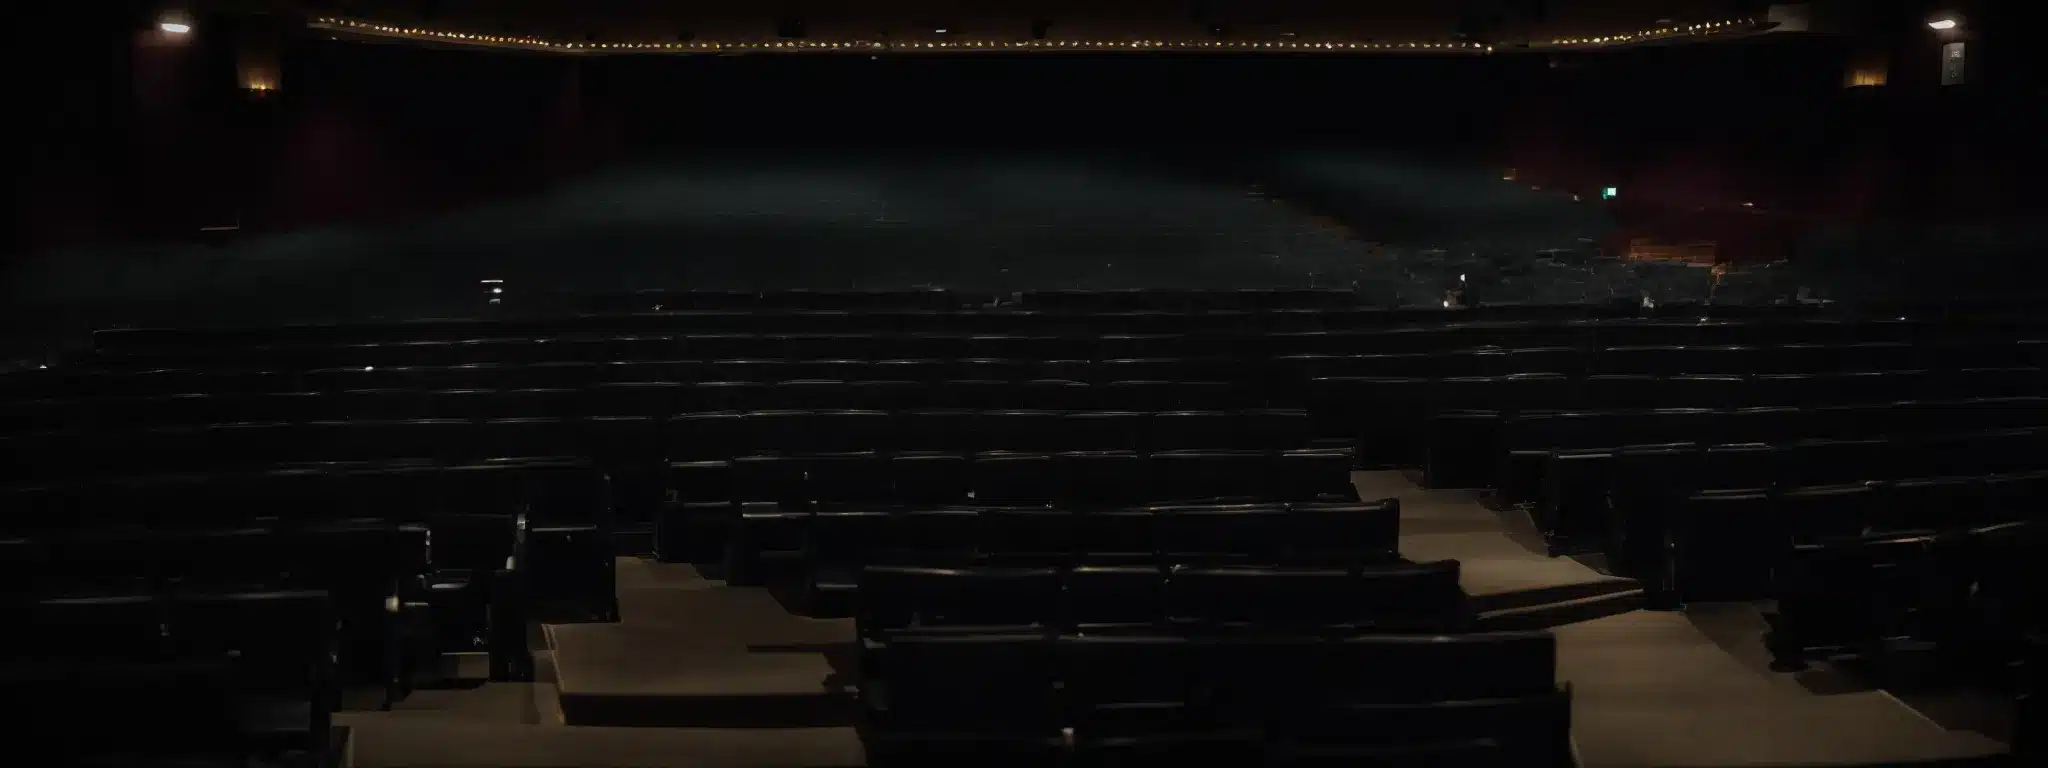 A Spotlight Shining Center Stage On An Empty Theater With Rows Of Seats Facing Towards The Stage, Waiting For The Performance Of Strategy To Begin.